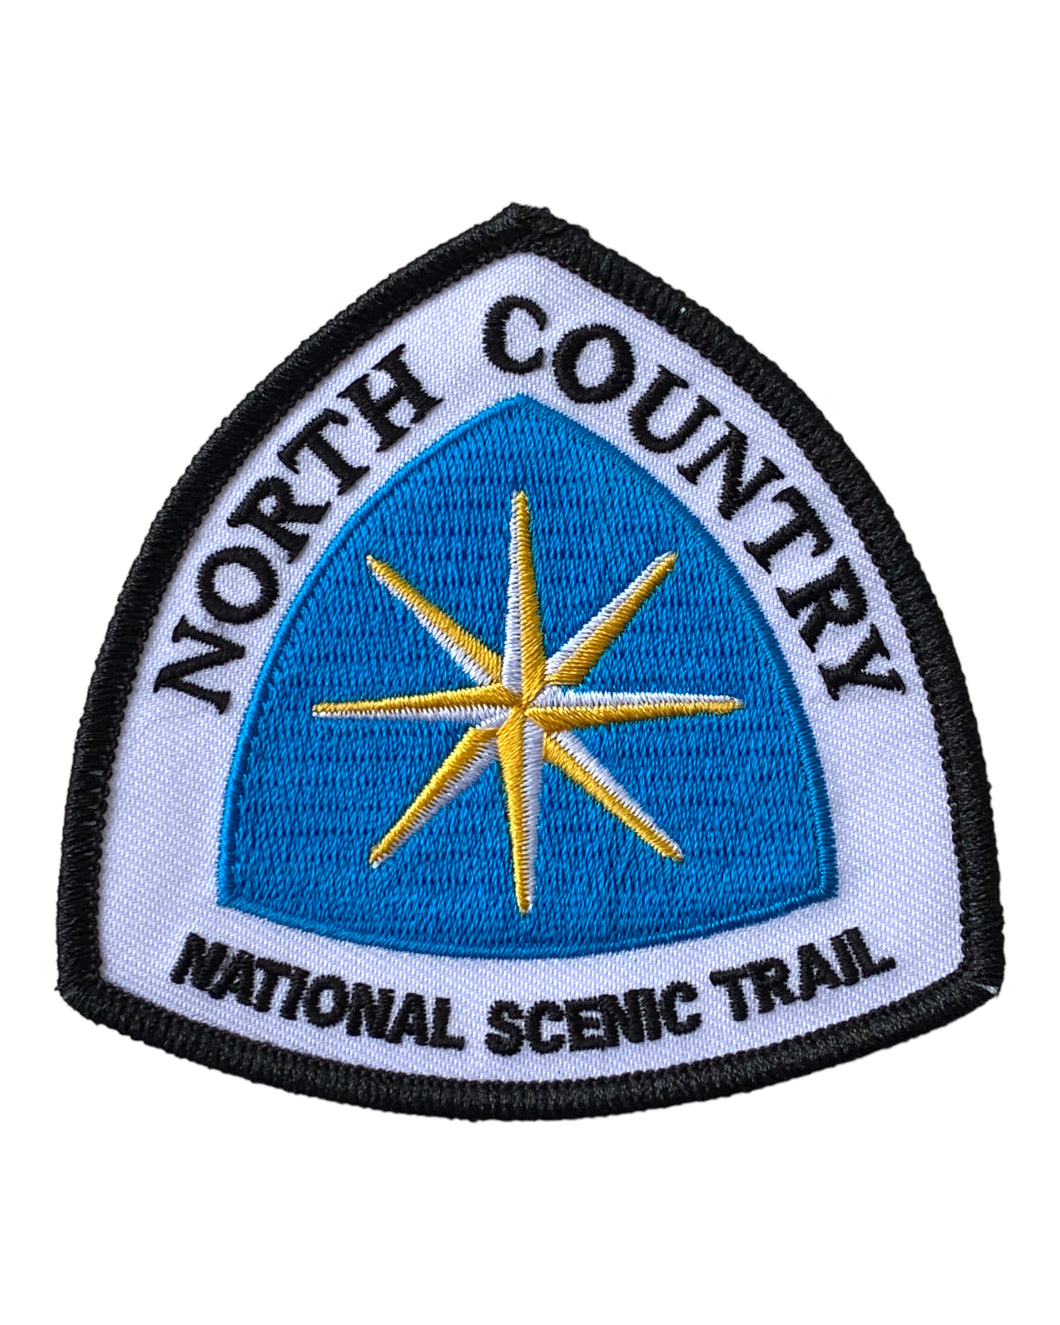 Front View of NORTH COUNTRY NATIONAL SCENIC TRAIL COLLECTOR HIKING PATCH